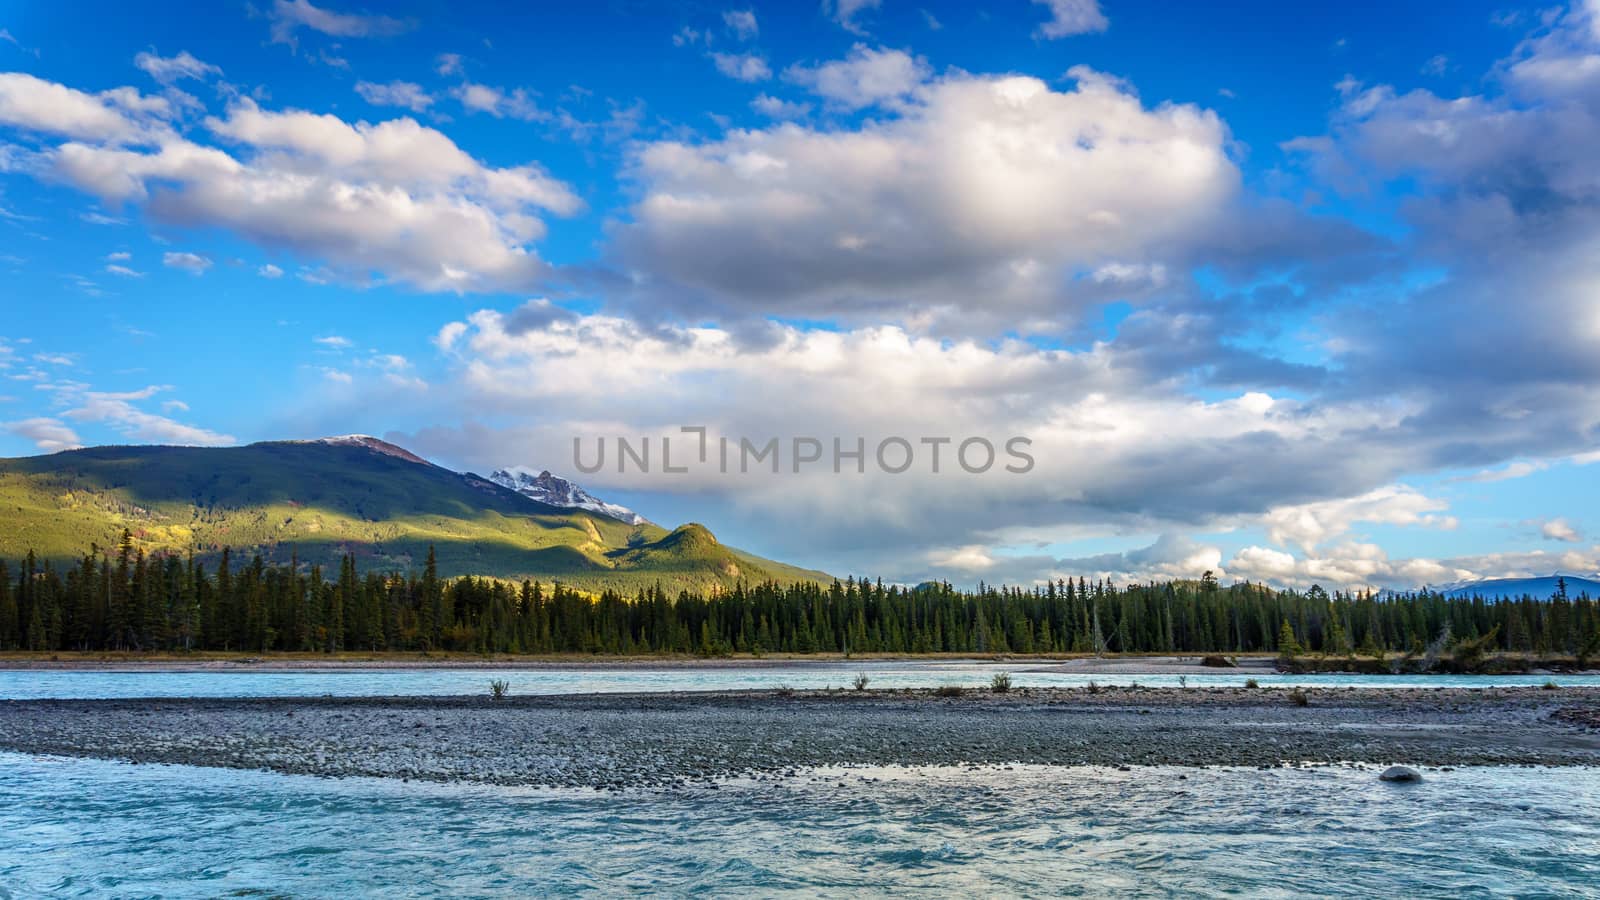 Daybreak over the Athabasca River near the town of Jasper in Jasper National Park in the Canadian Rocky Mountains